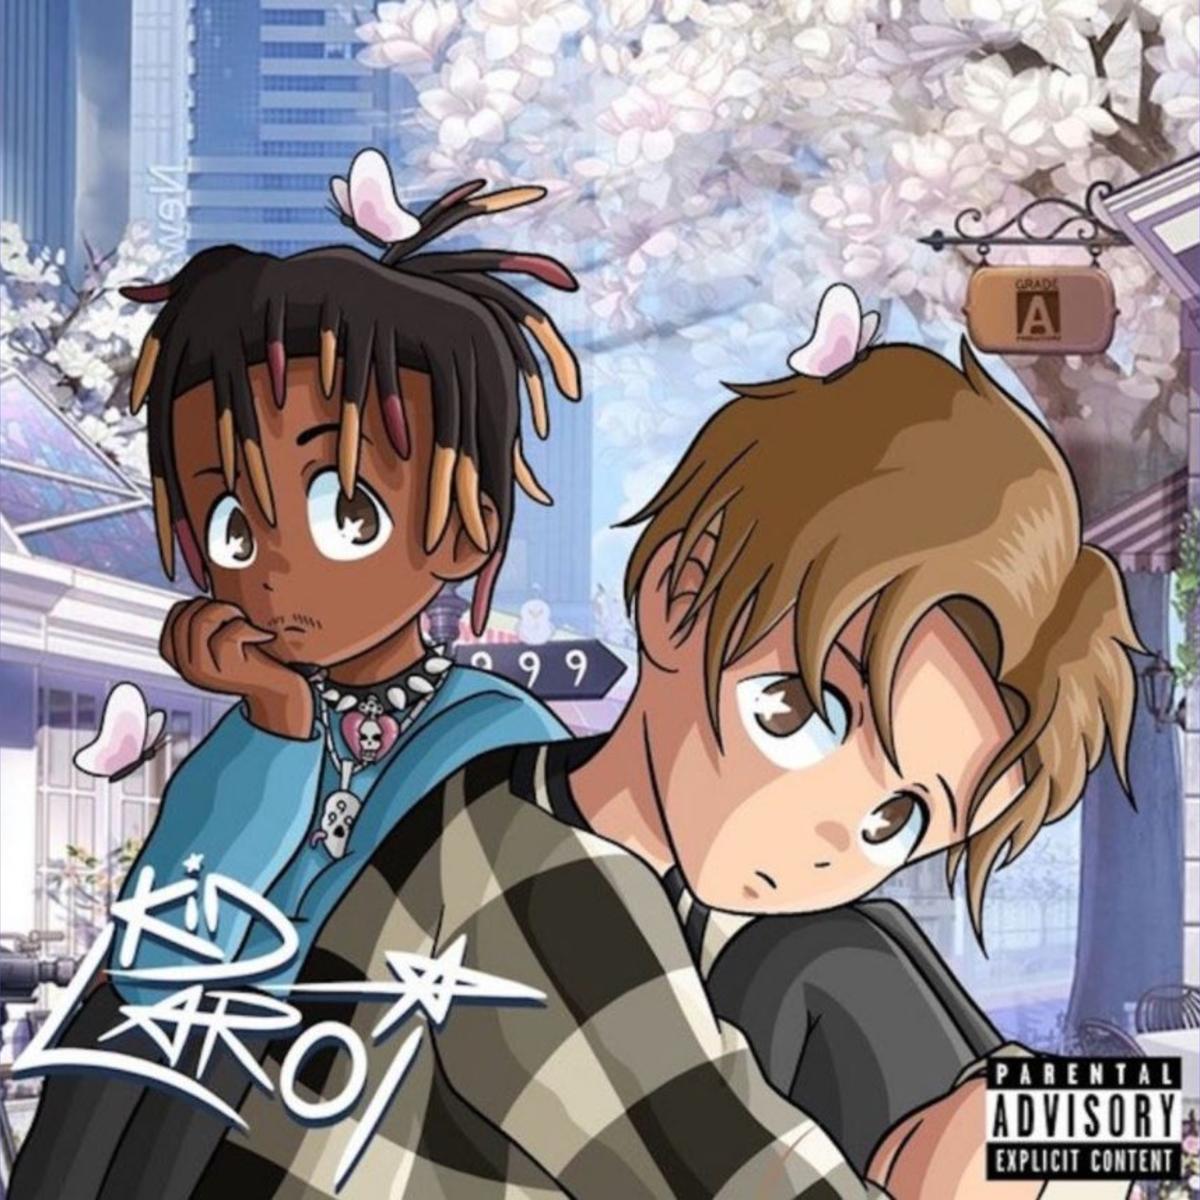 The Kid LAROI Releases “Reminds Me Of You” With Juice WRLD